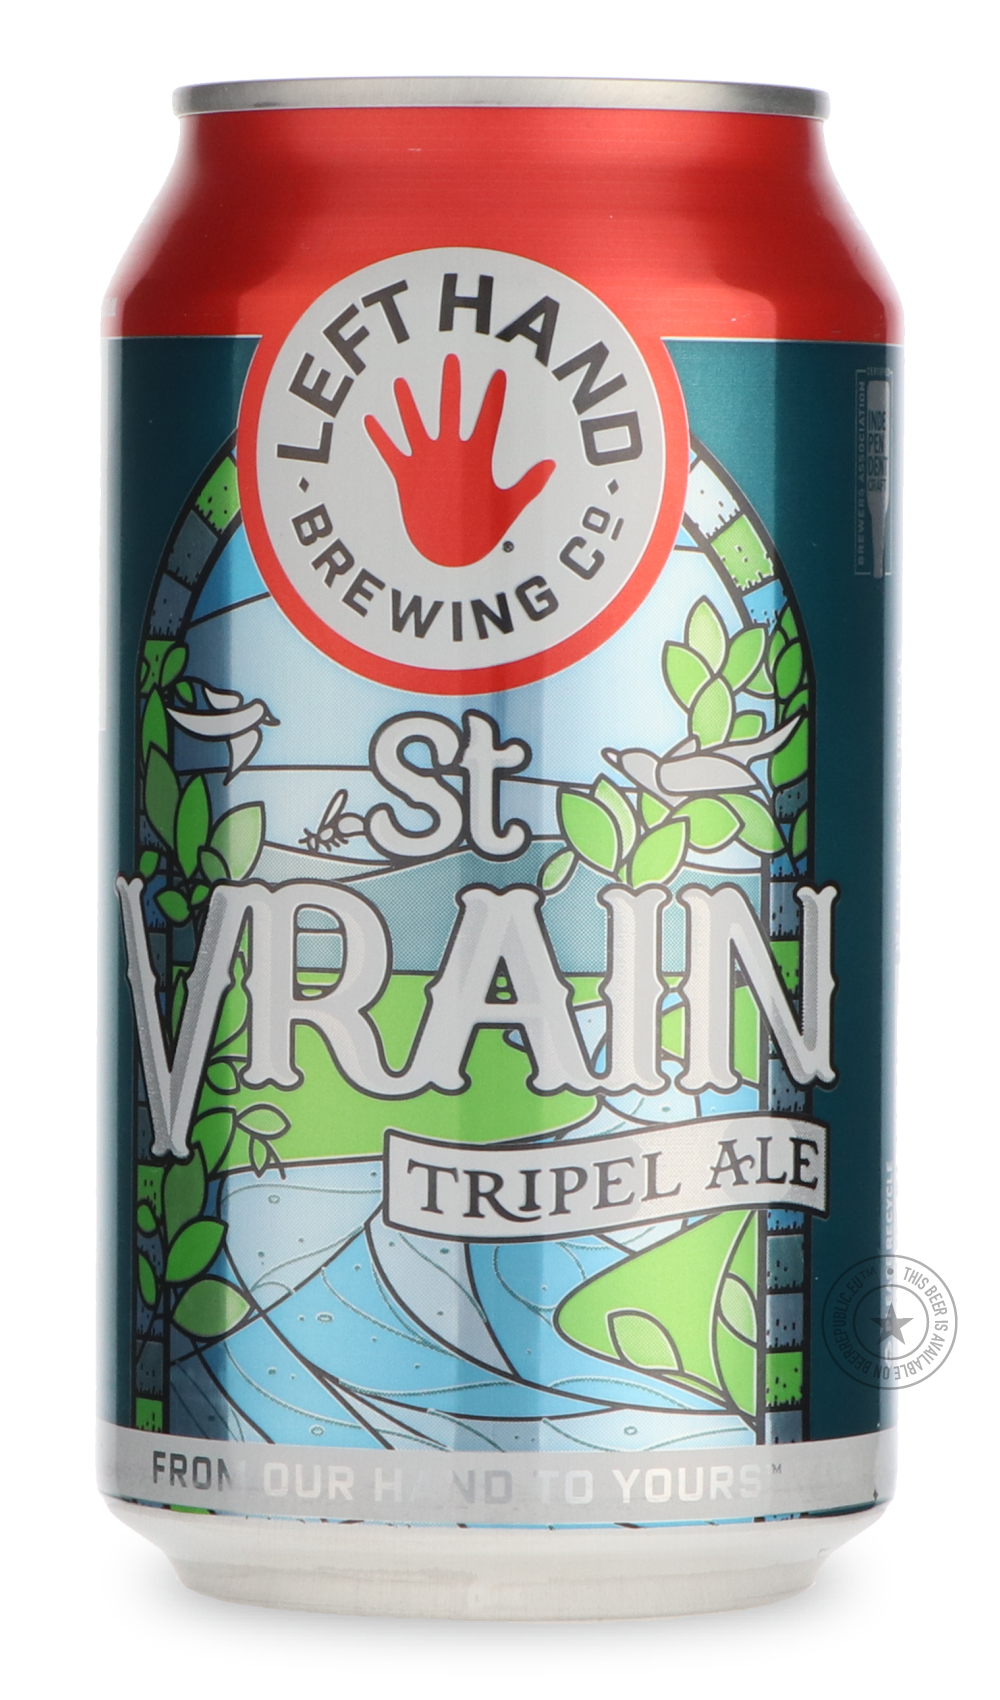 -Left Hand- St. Vrain-Pale- Only @ Beer Republic - The best online beer store for American & Canadian craft beer - Buy beer online from the USA and Canada - Bier online kopen - Amerikaans bier kopen - Craft beer store - Craft beer kopen - Amerikanisch bier kaufen - Bier online kaufen - Acheter biere online - IPA - Stout - Porter - New England IPA - Hazy IPA - Imperial Stout - Barrel Aged - Barrel Aged Imperial Stout - Brown - Dark beer - Blond - Blonde - Pilsner - Lager - Wheat - Weizen - Amber - Barley Win